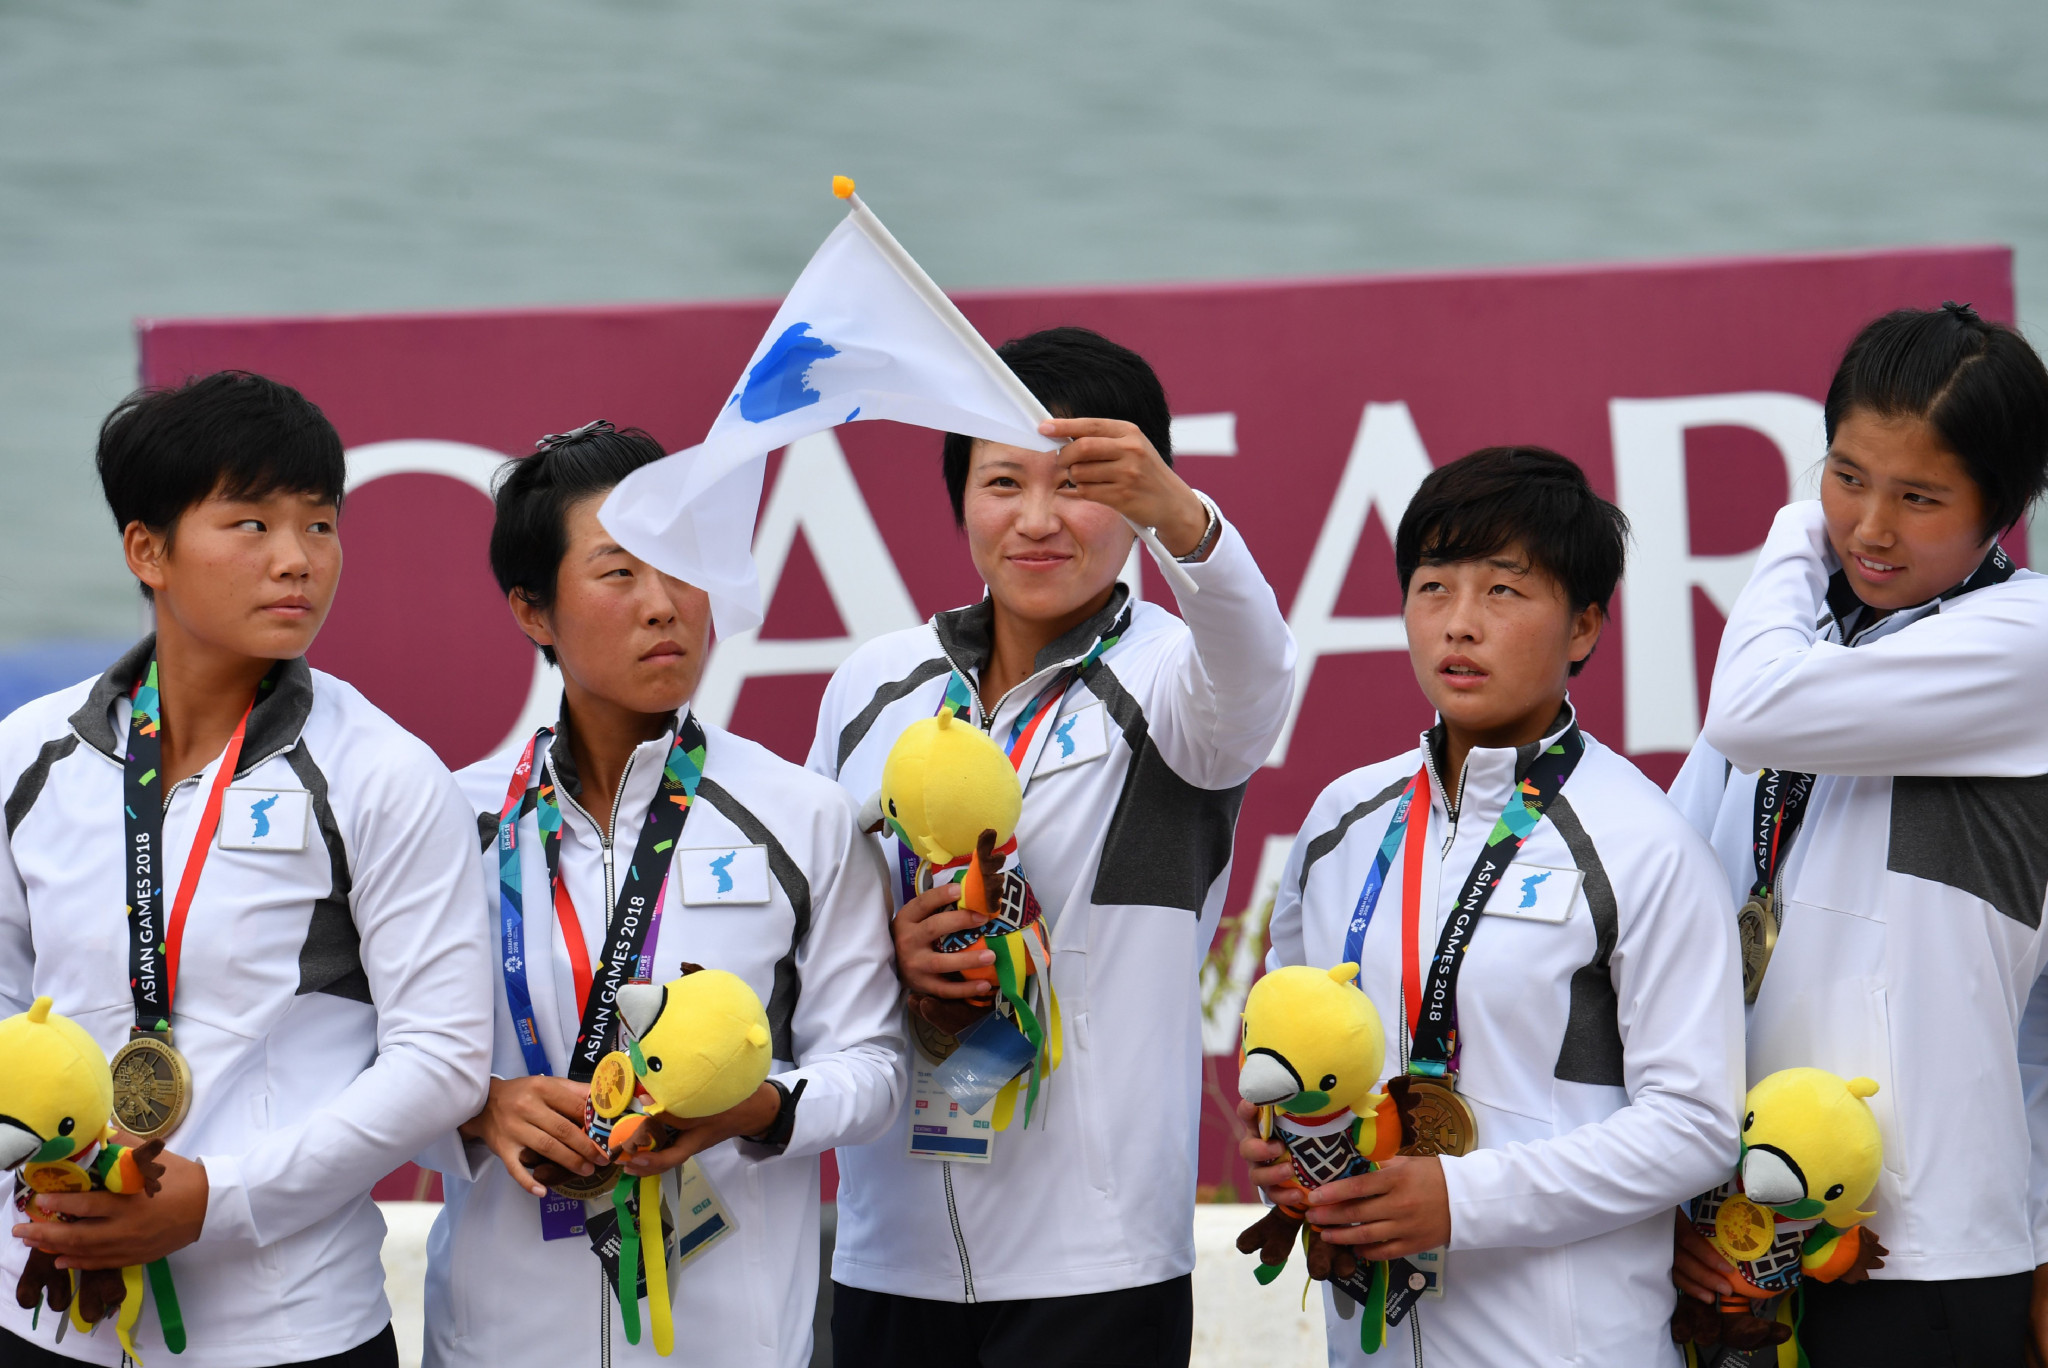 Unified Korean team win dragon boat bronze medal on historic day at 2018 Asian Games